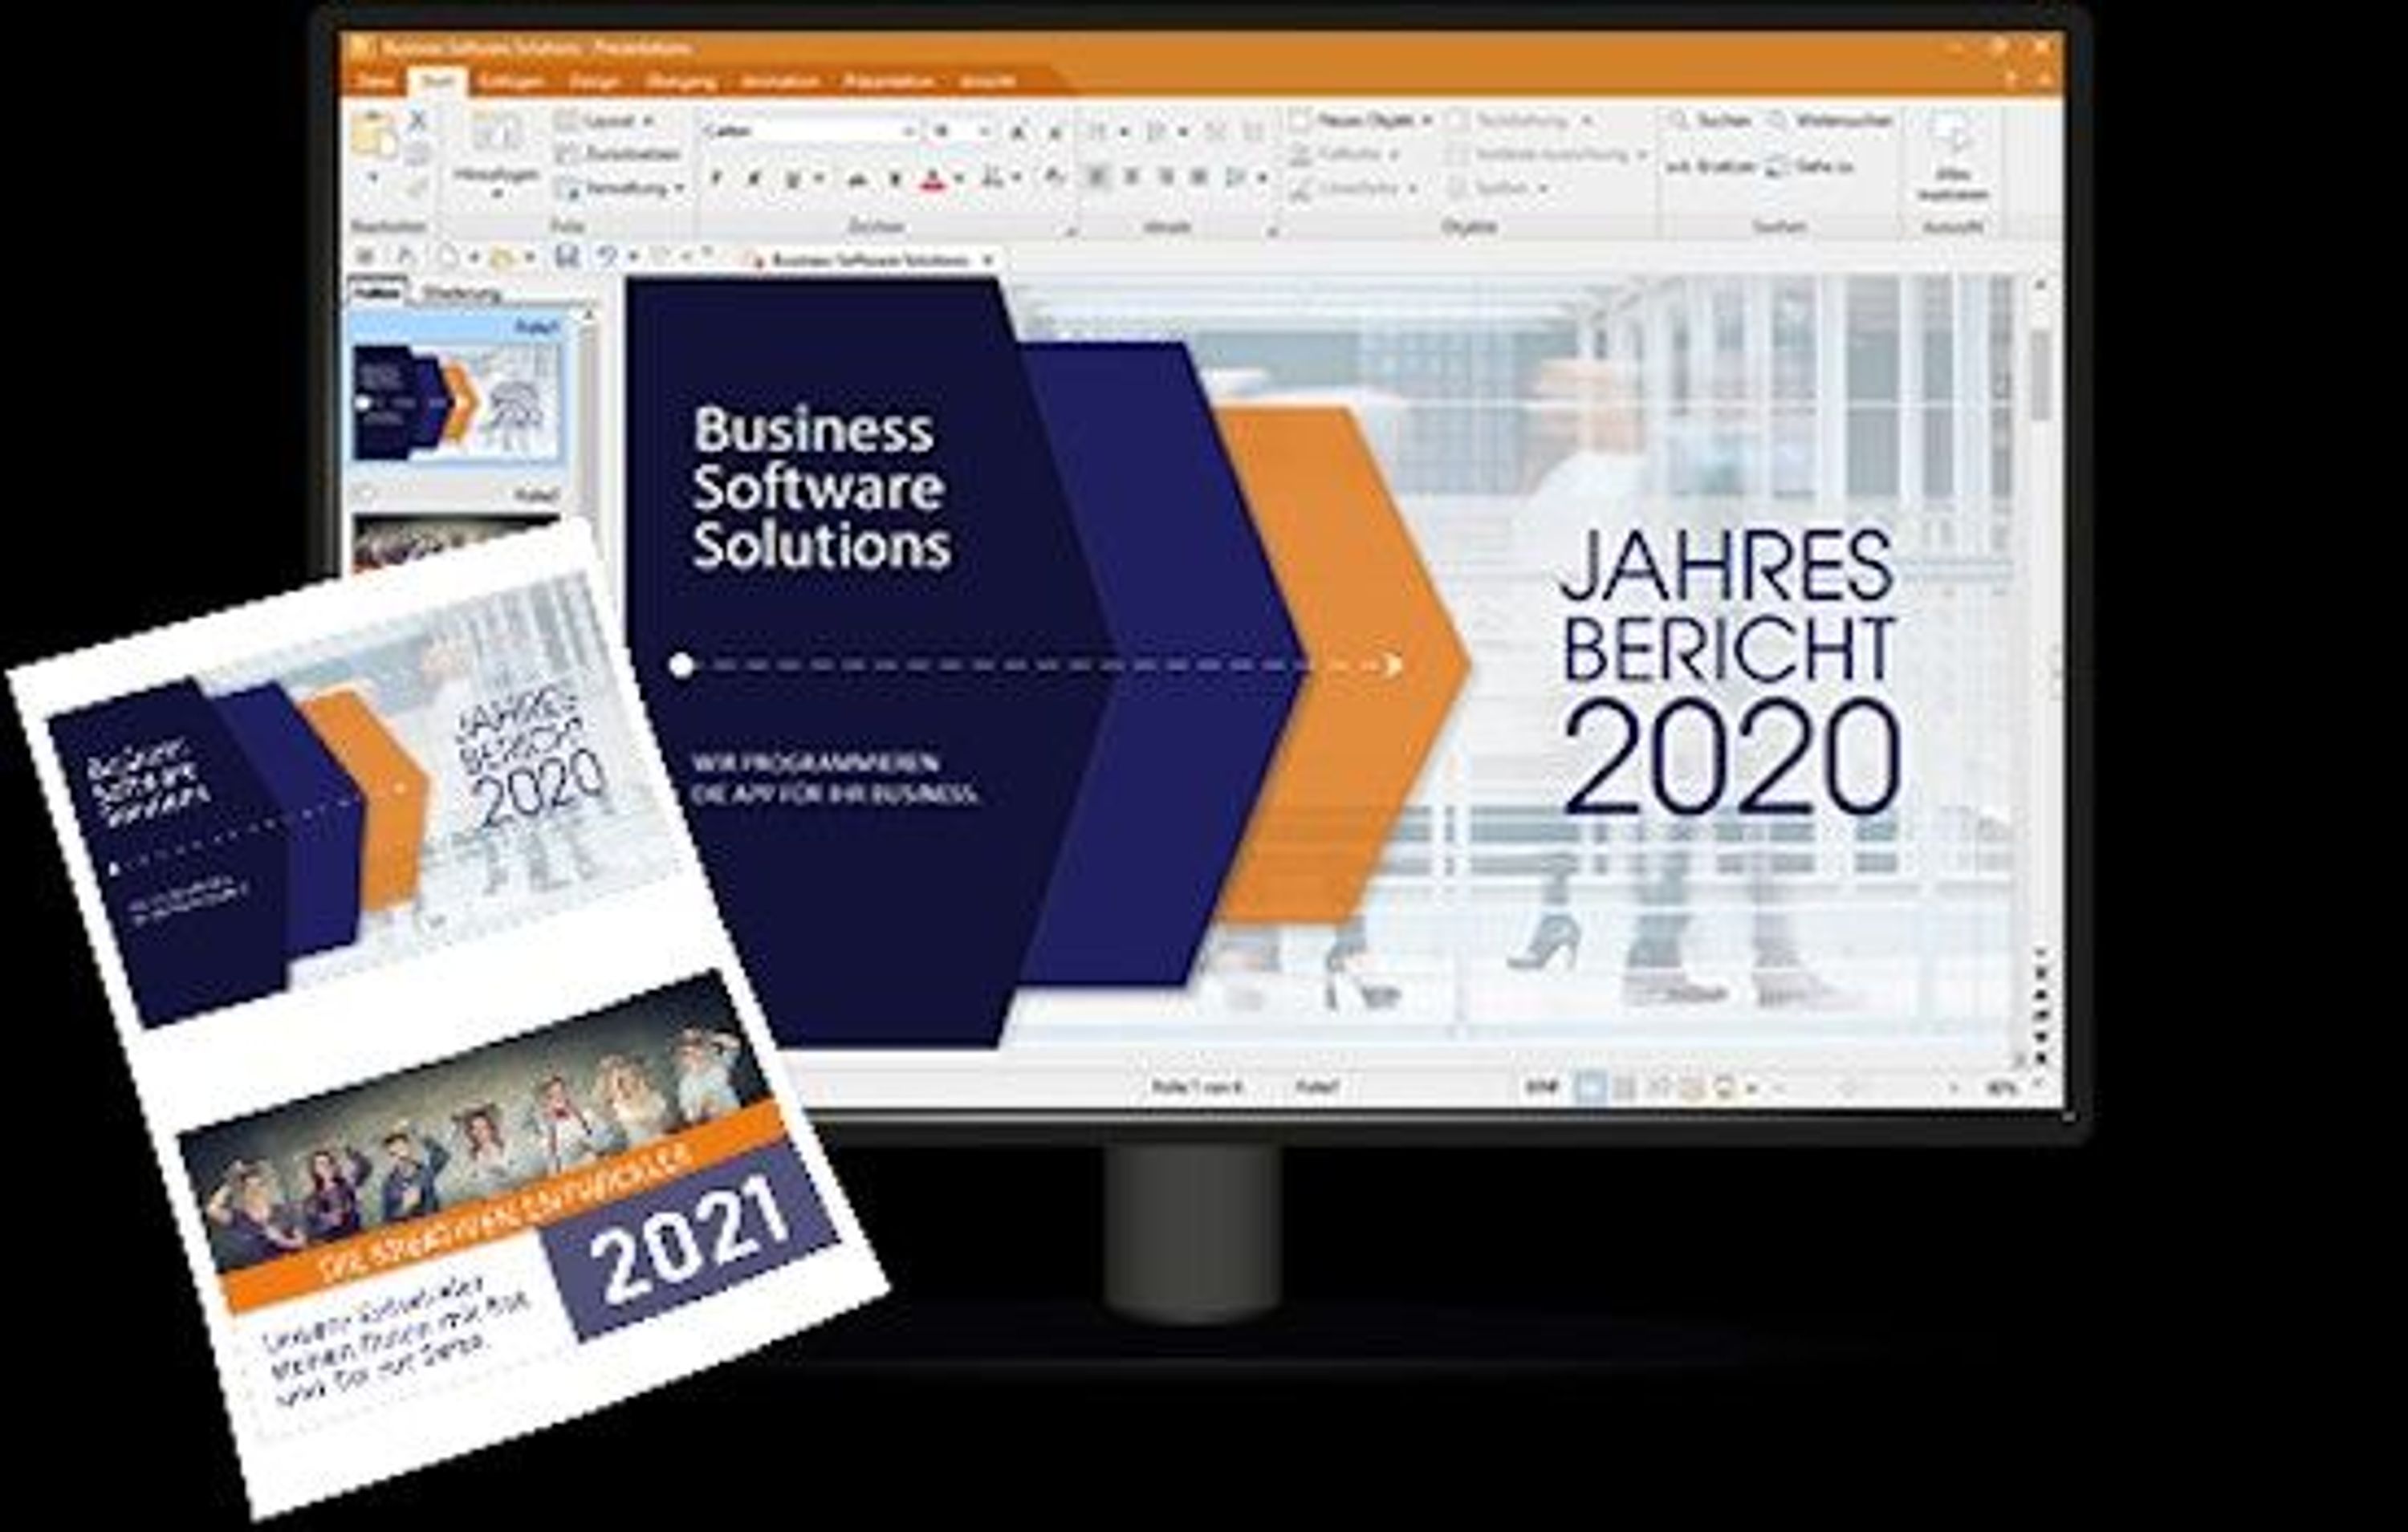 download the new SoftMaker Office Professional 2021 rev.1066.0605